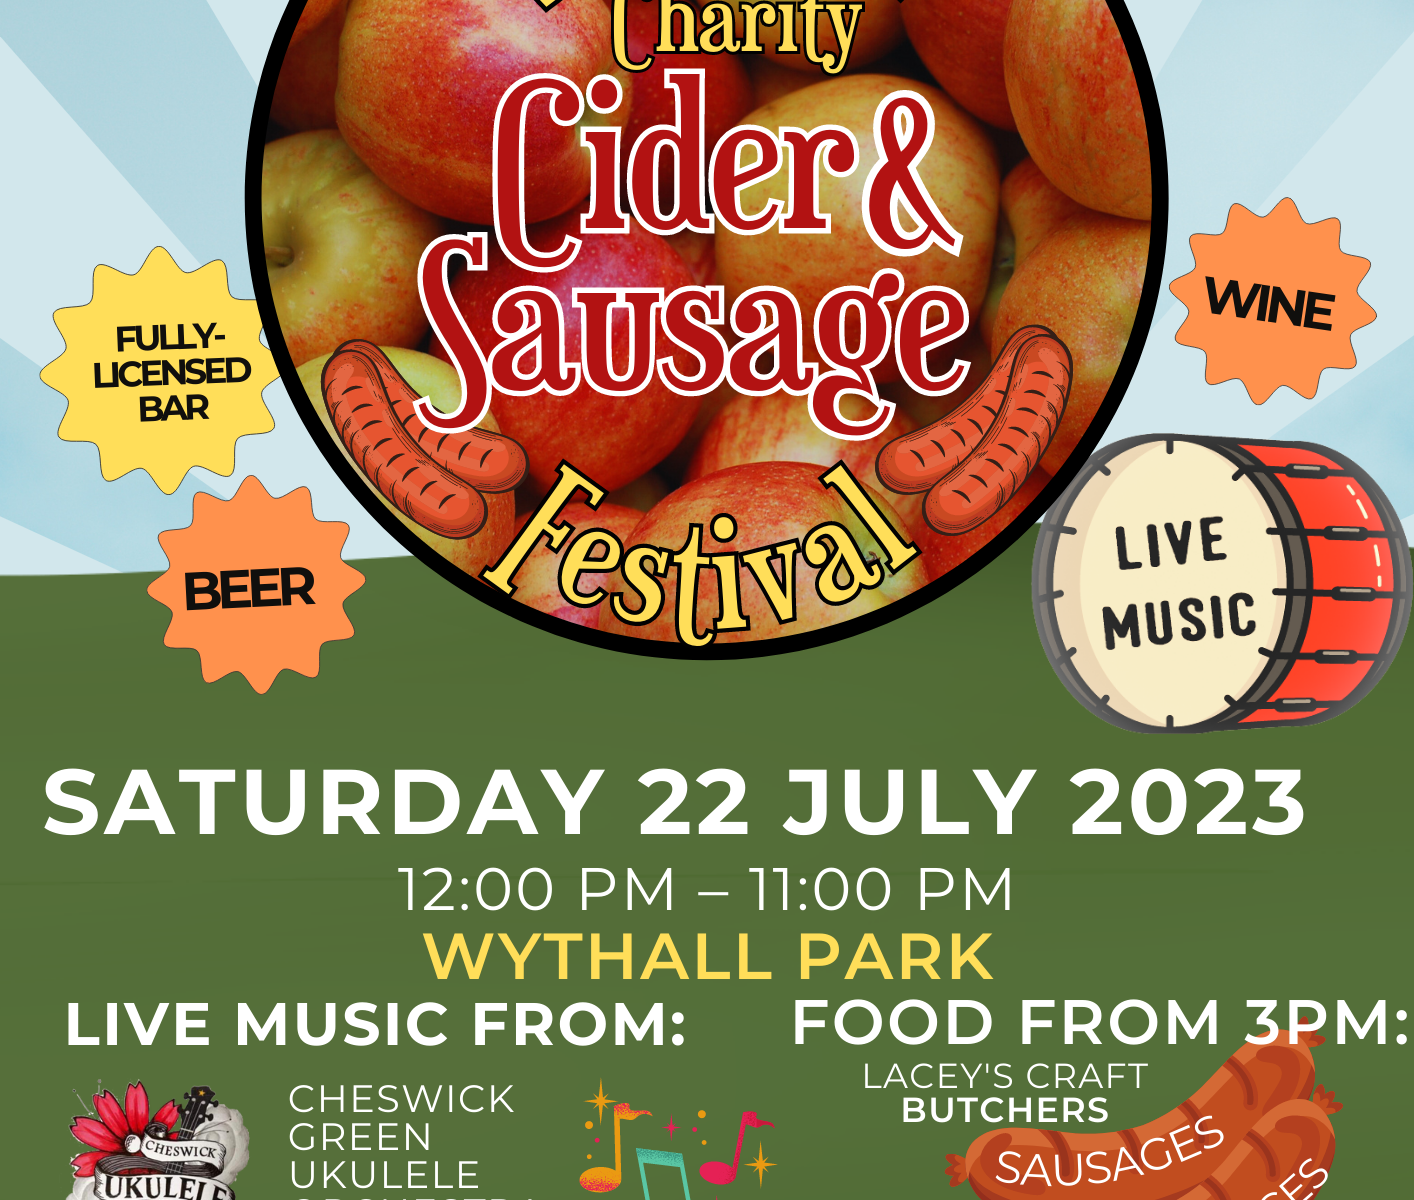 Charity Cider and Sausage Festival